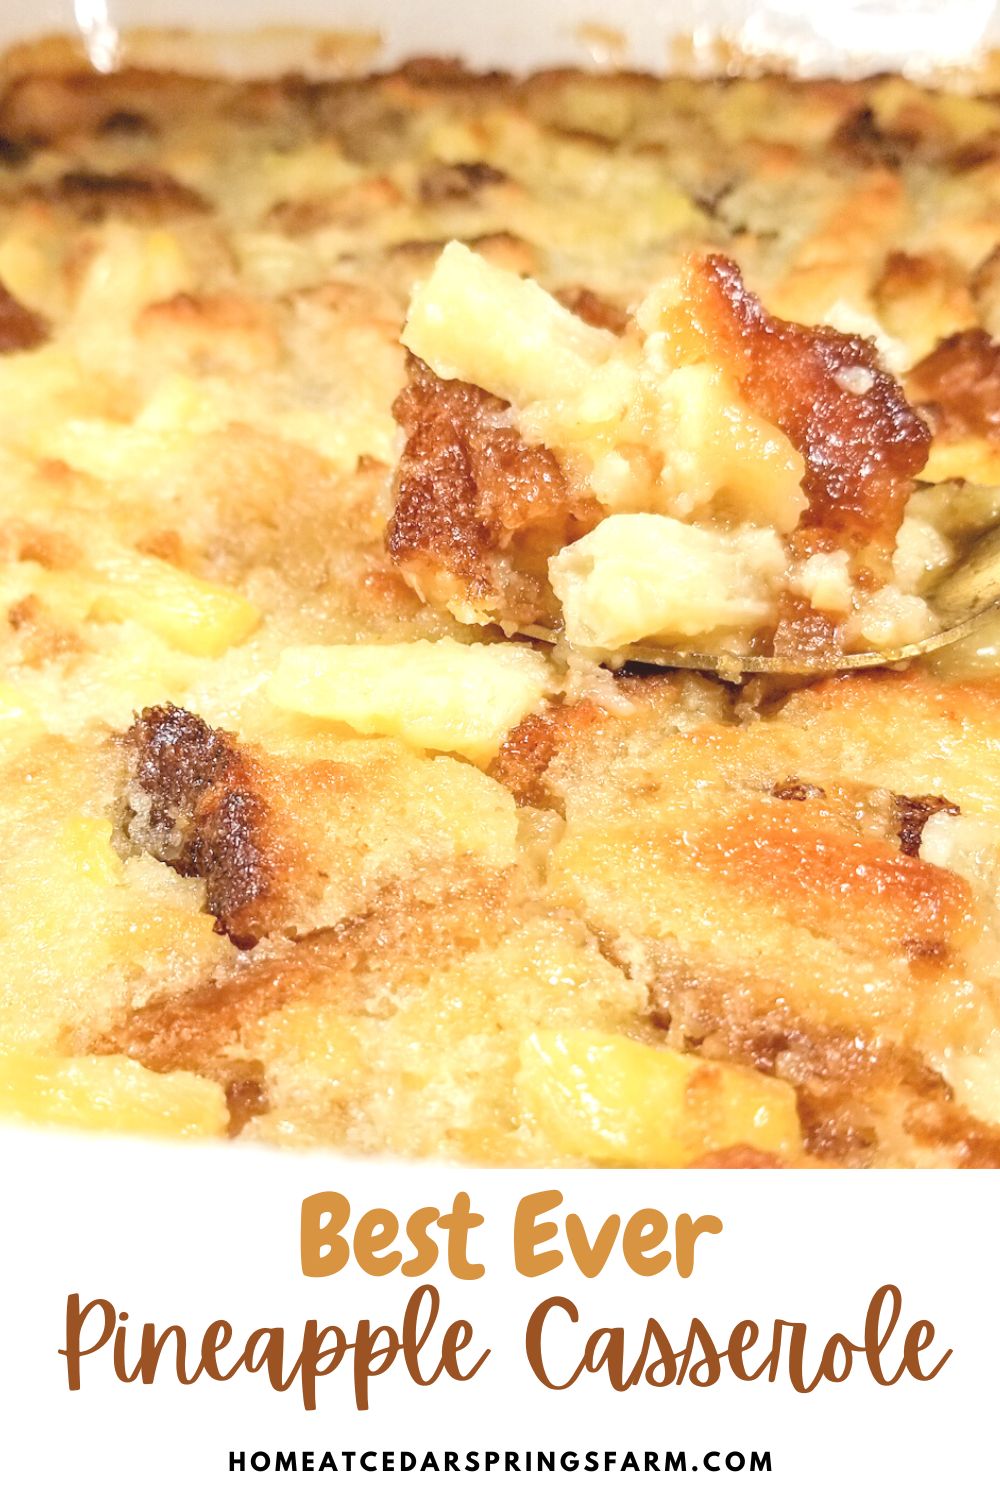 Picture of pineapple casserole with text overlay.